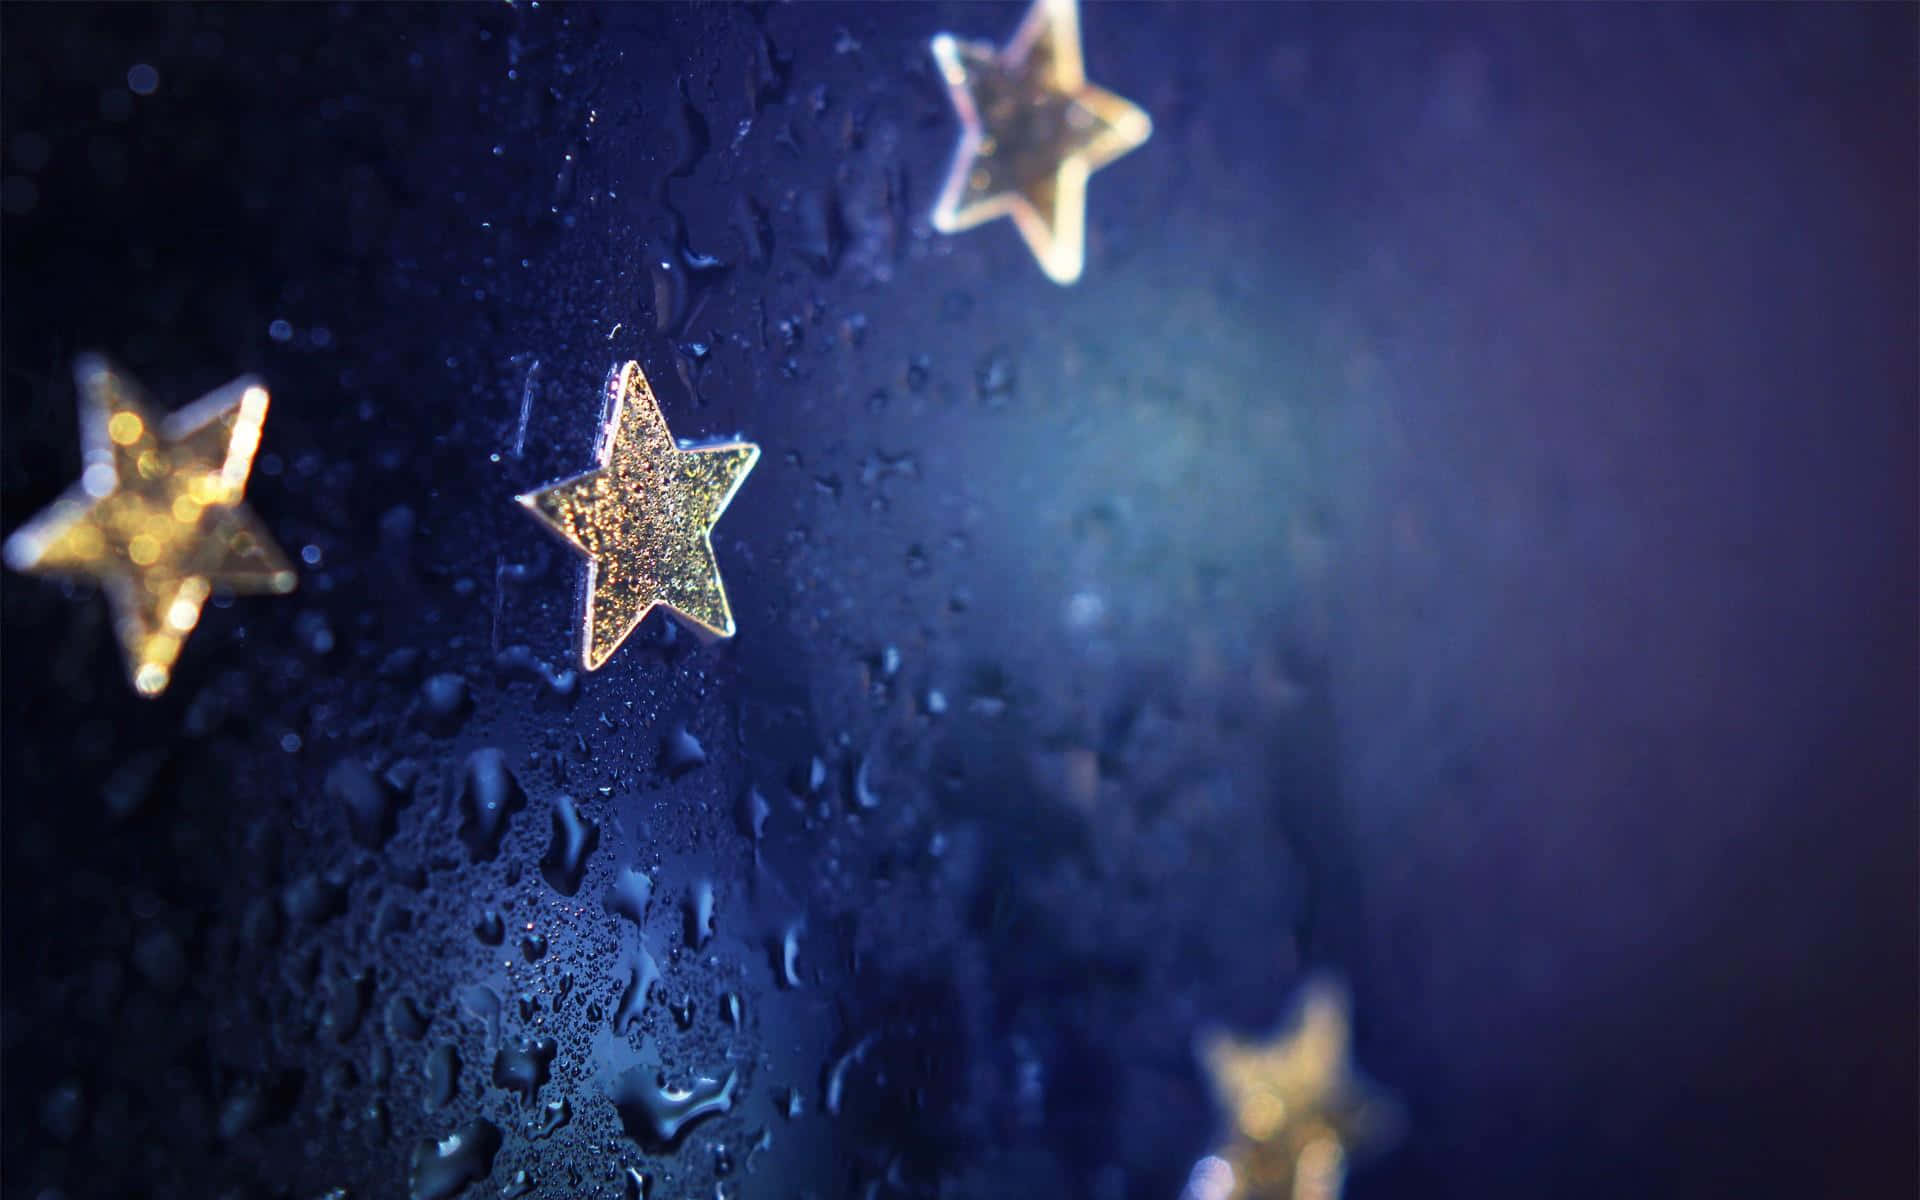 Brighten up your day with these beautiful stars! Wallpaper